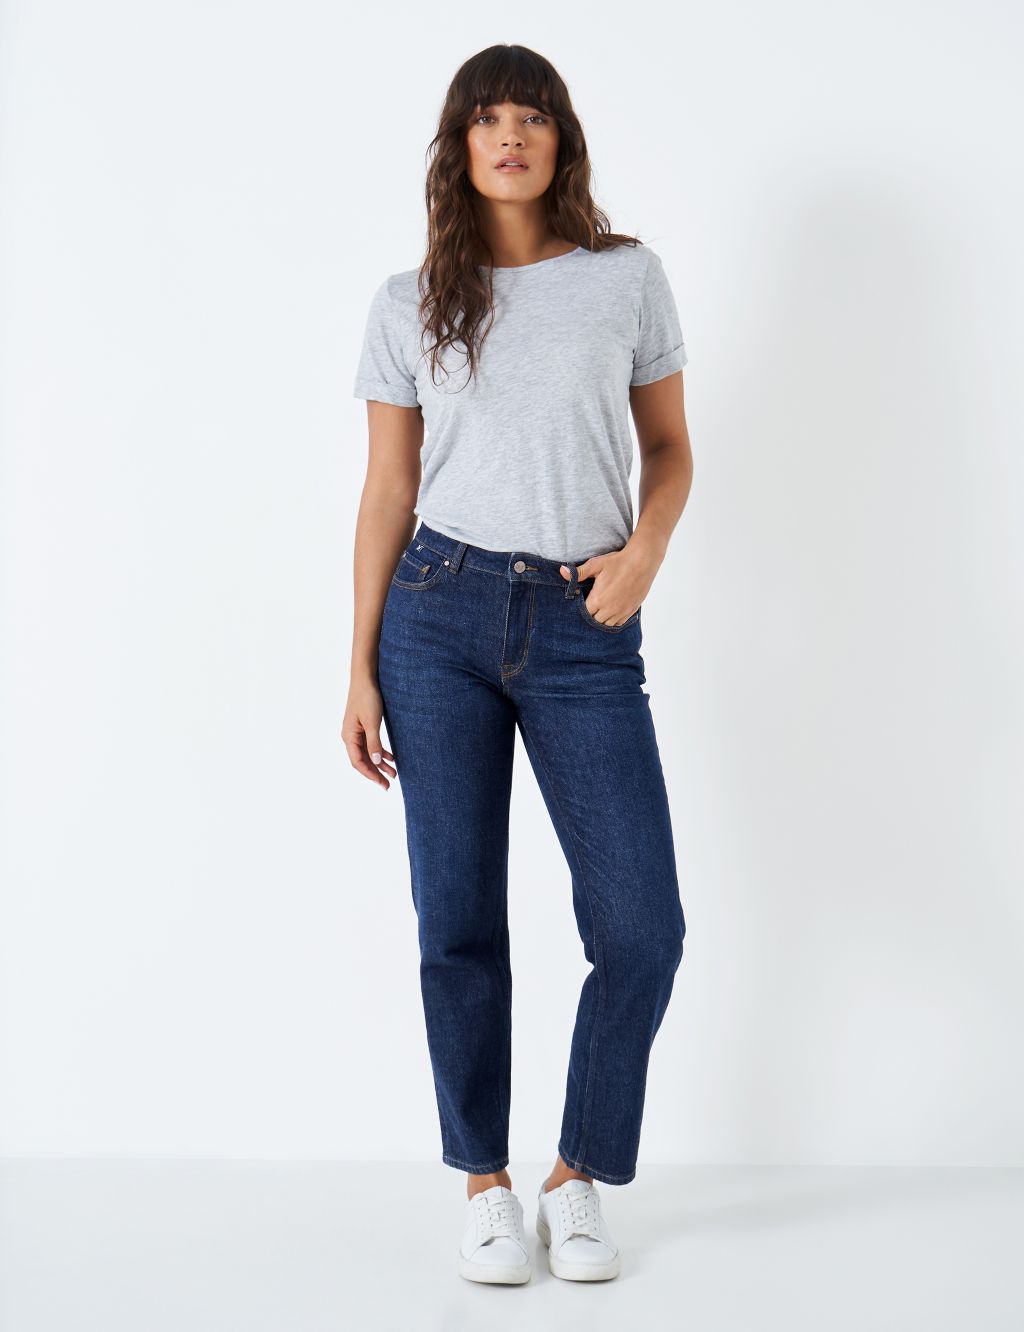 Girlfriend High Waisted Jeans image 1